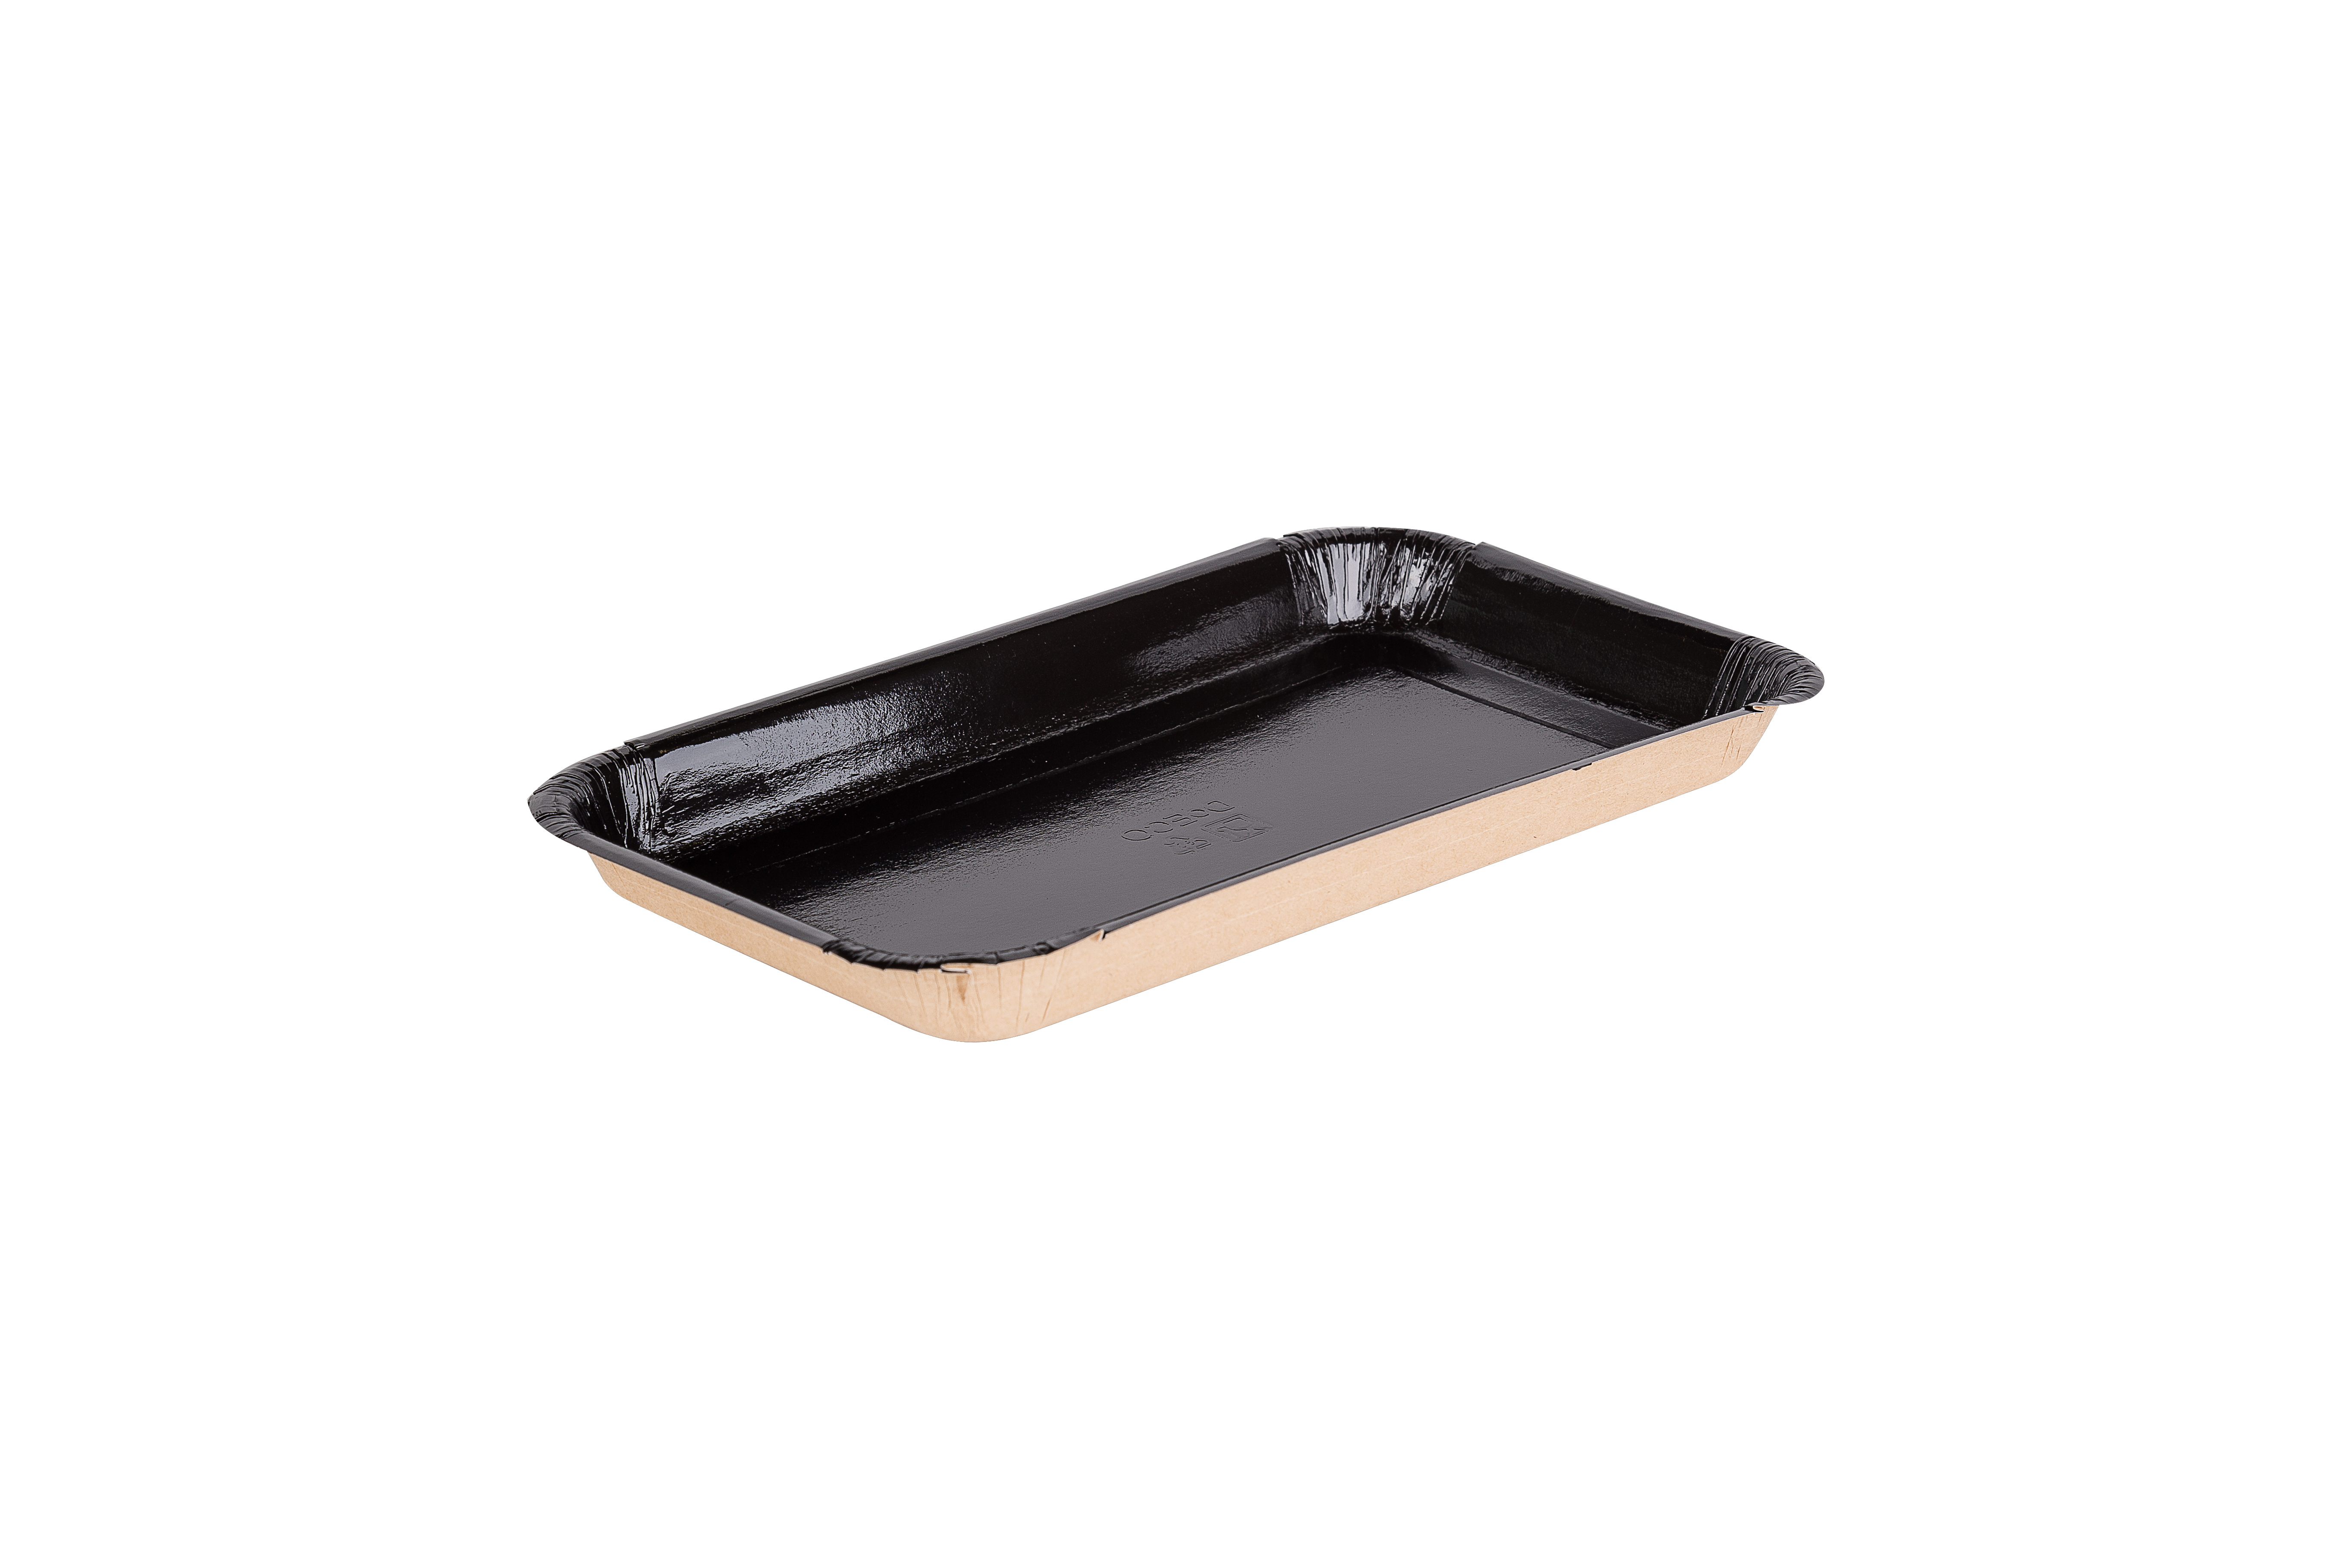 OSQ PLATTER 400 Black Edition tray for cooking, serving and packing cuts, vegetables